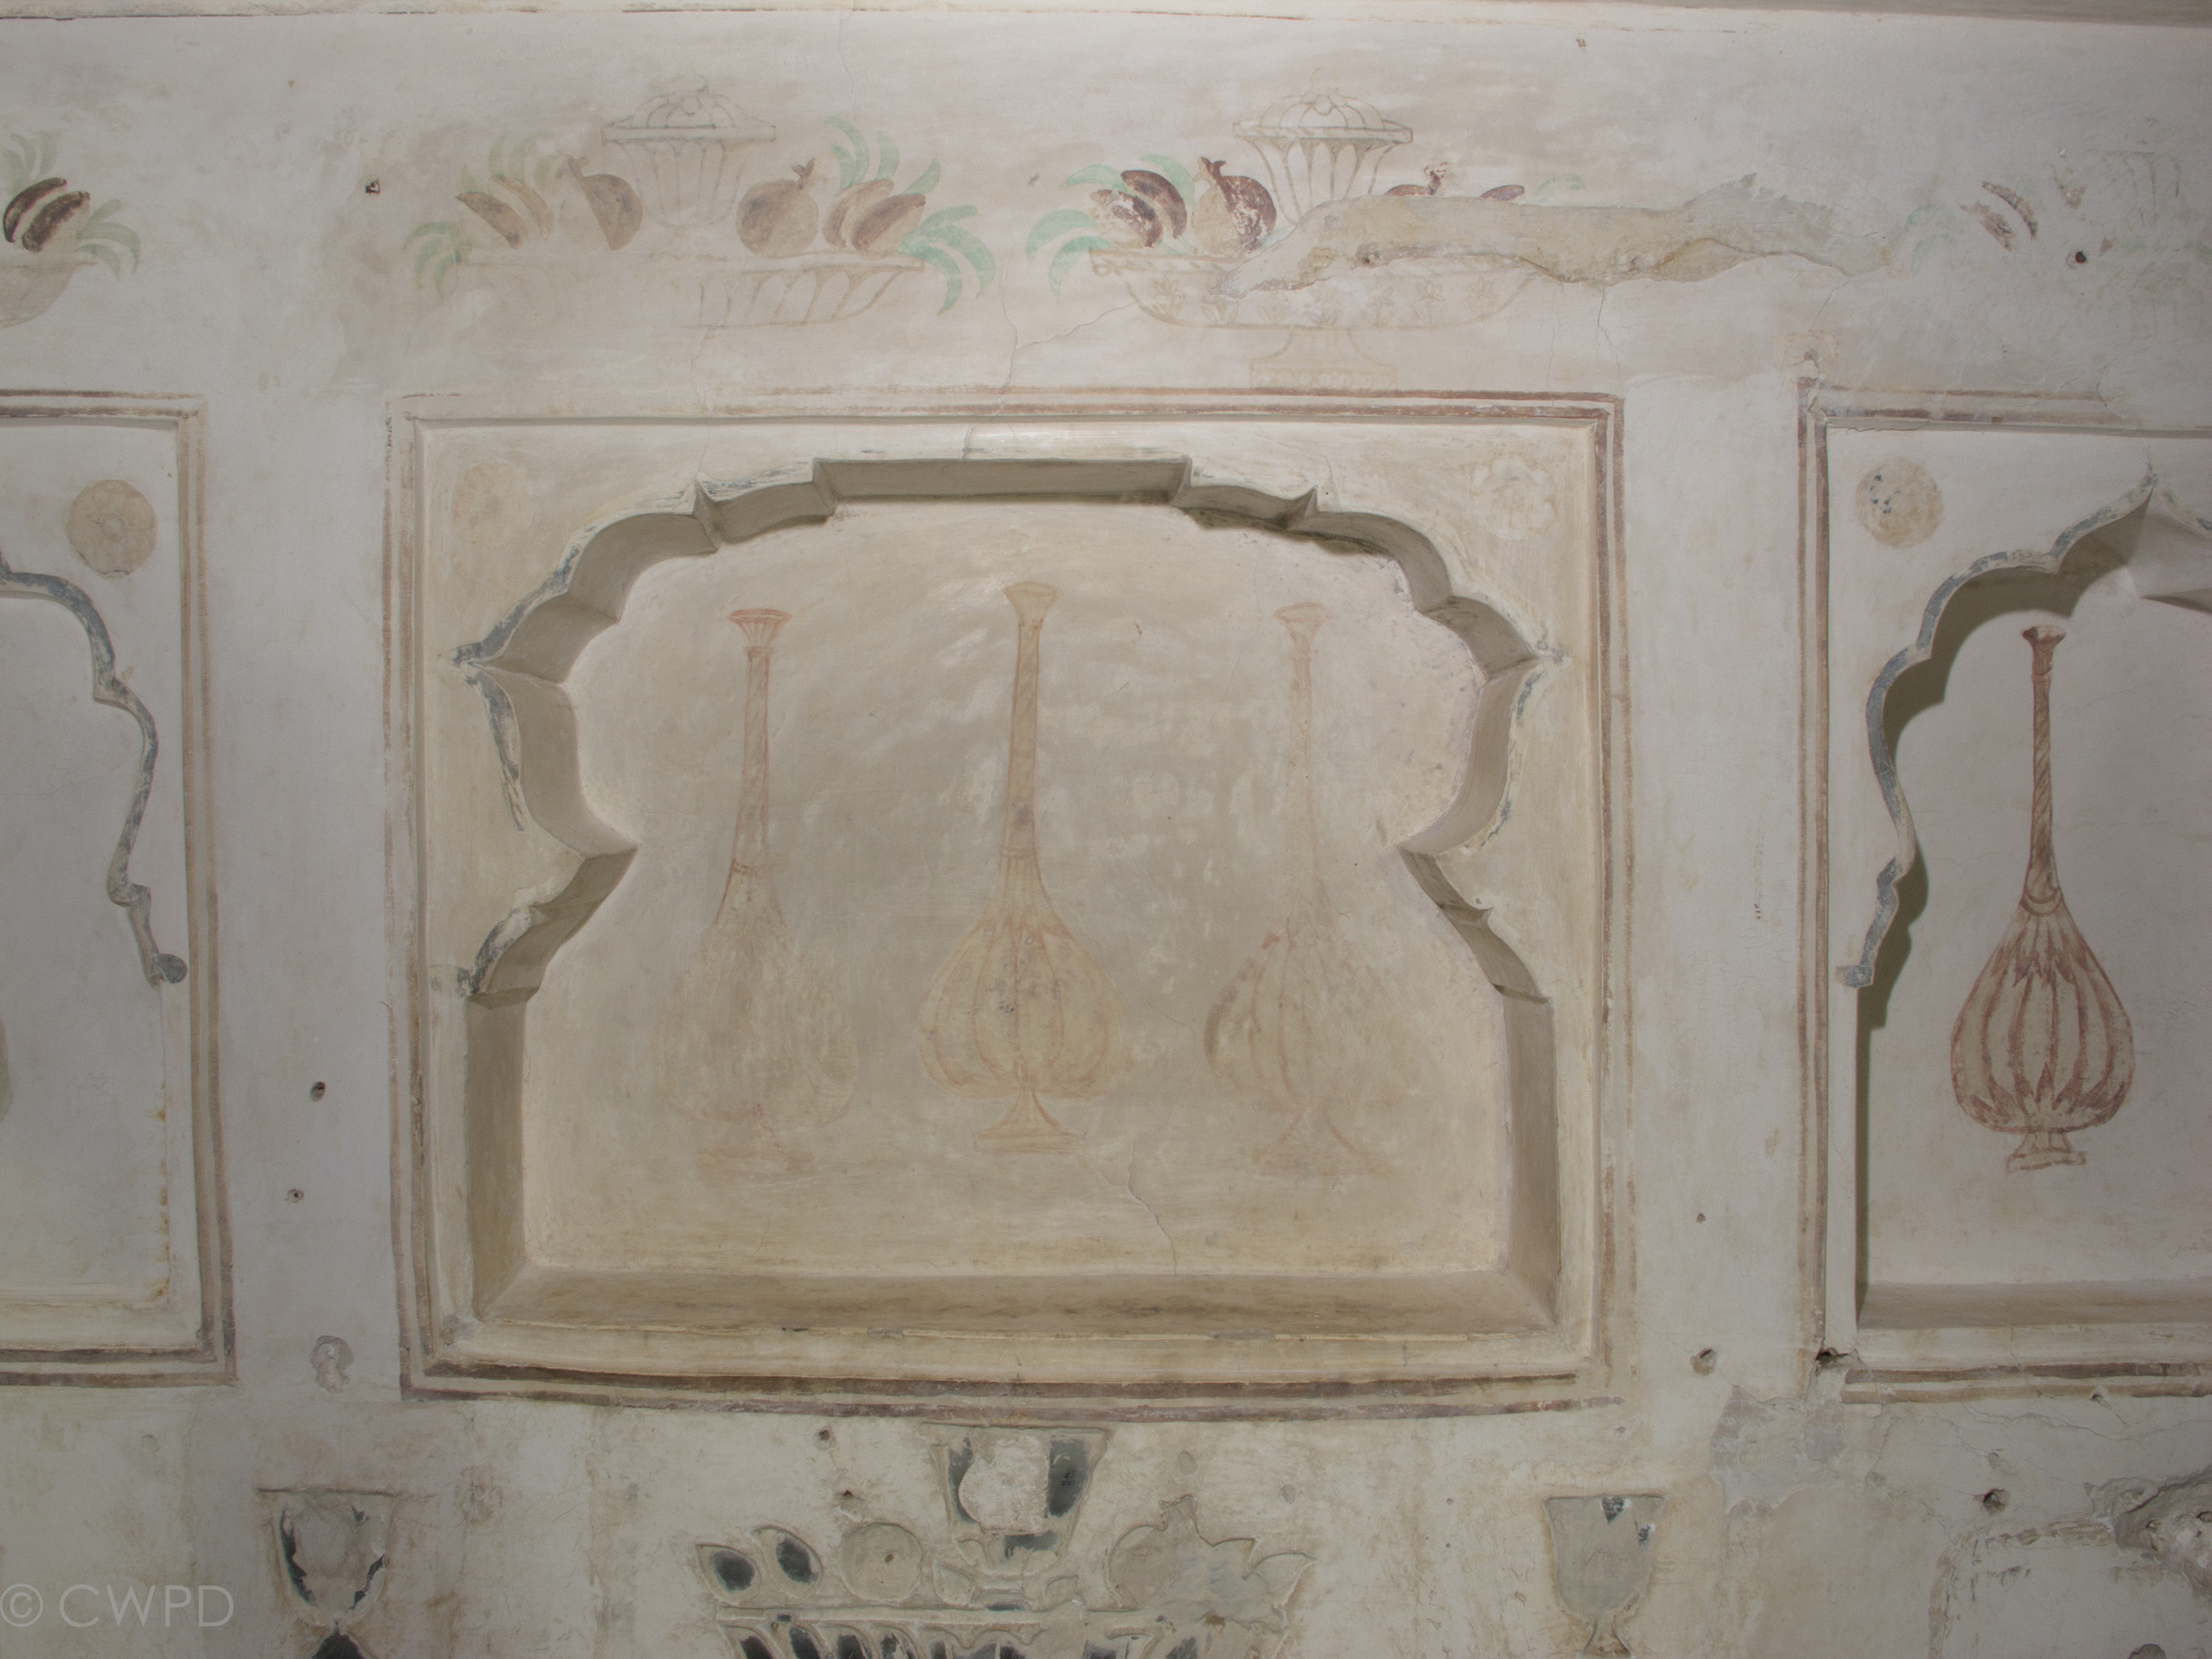  A thick brownish-yellow dirt layer was also removed from the upper walls. A multi-step process was used to protect the water-sensitive pigments during cleaning of the  araish .&nbsp;  Image © Courtauld CWPD 